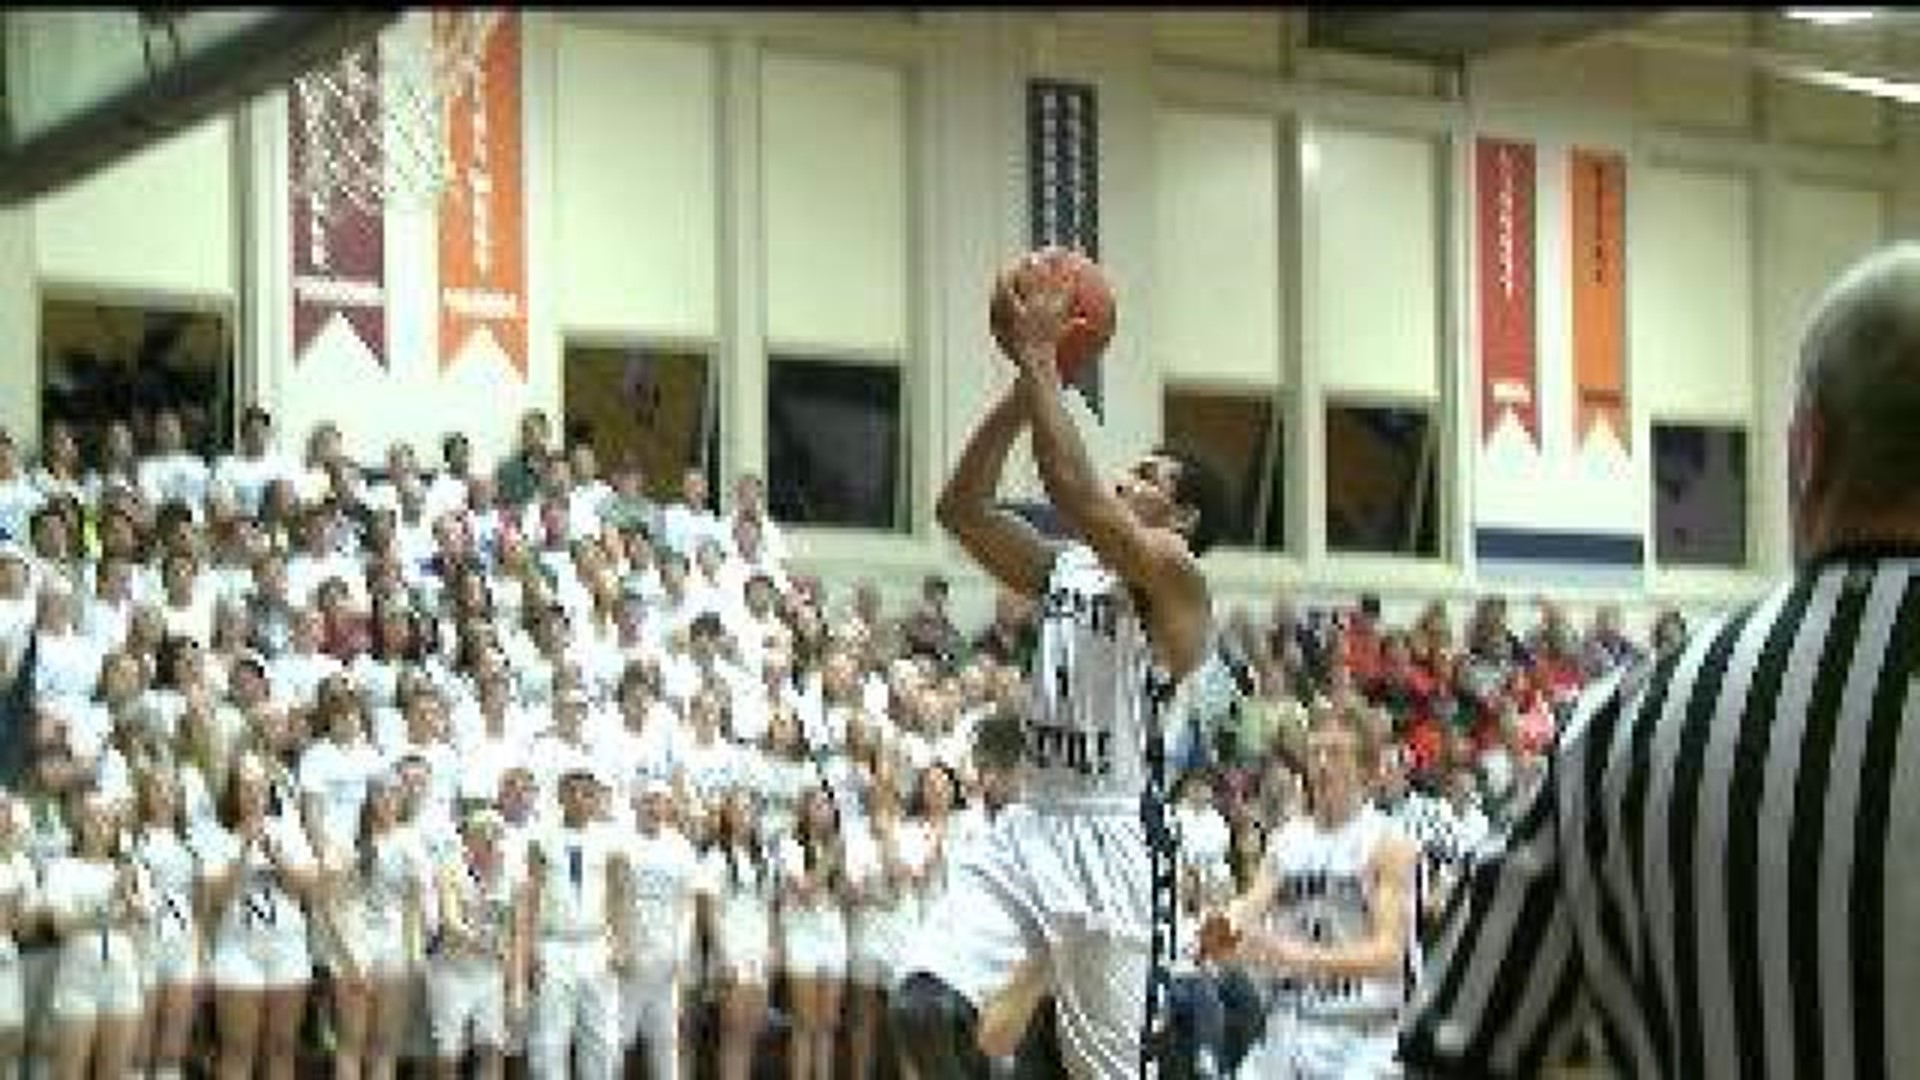 Monmouth-Roseville Bests Macomb